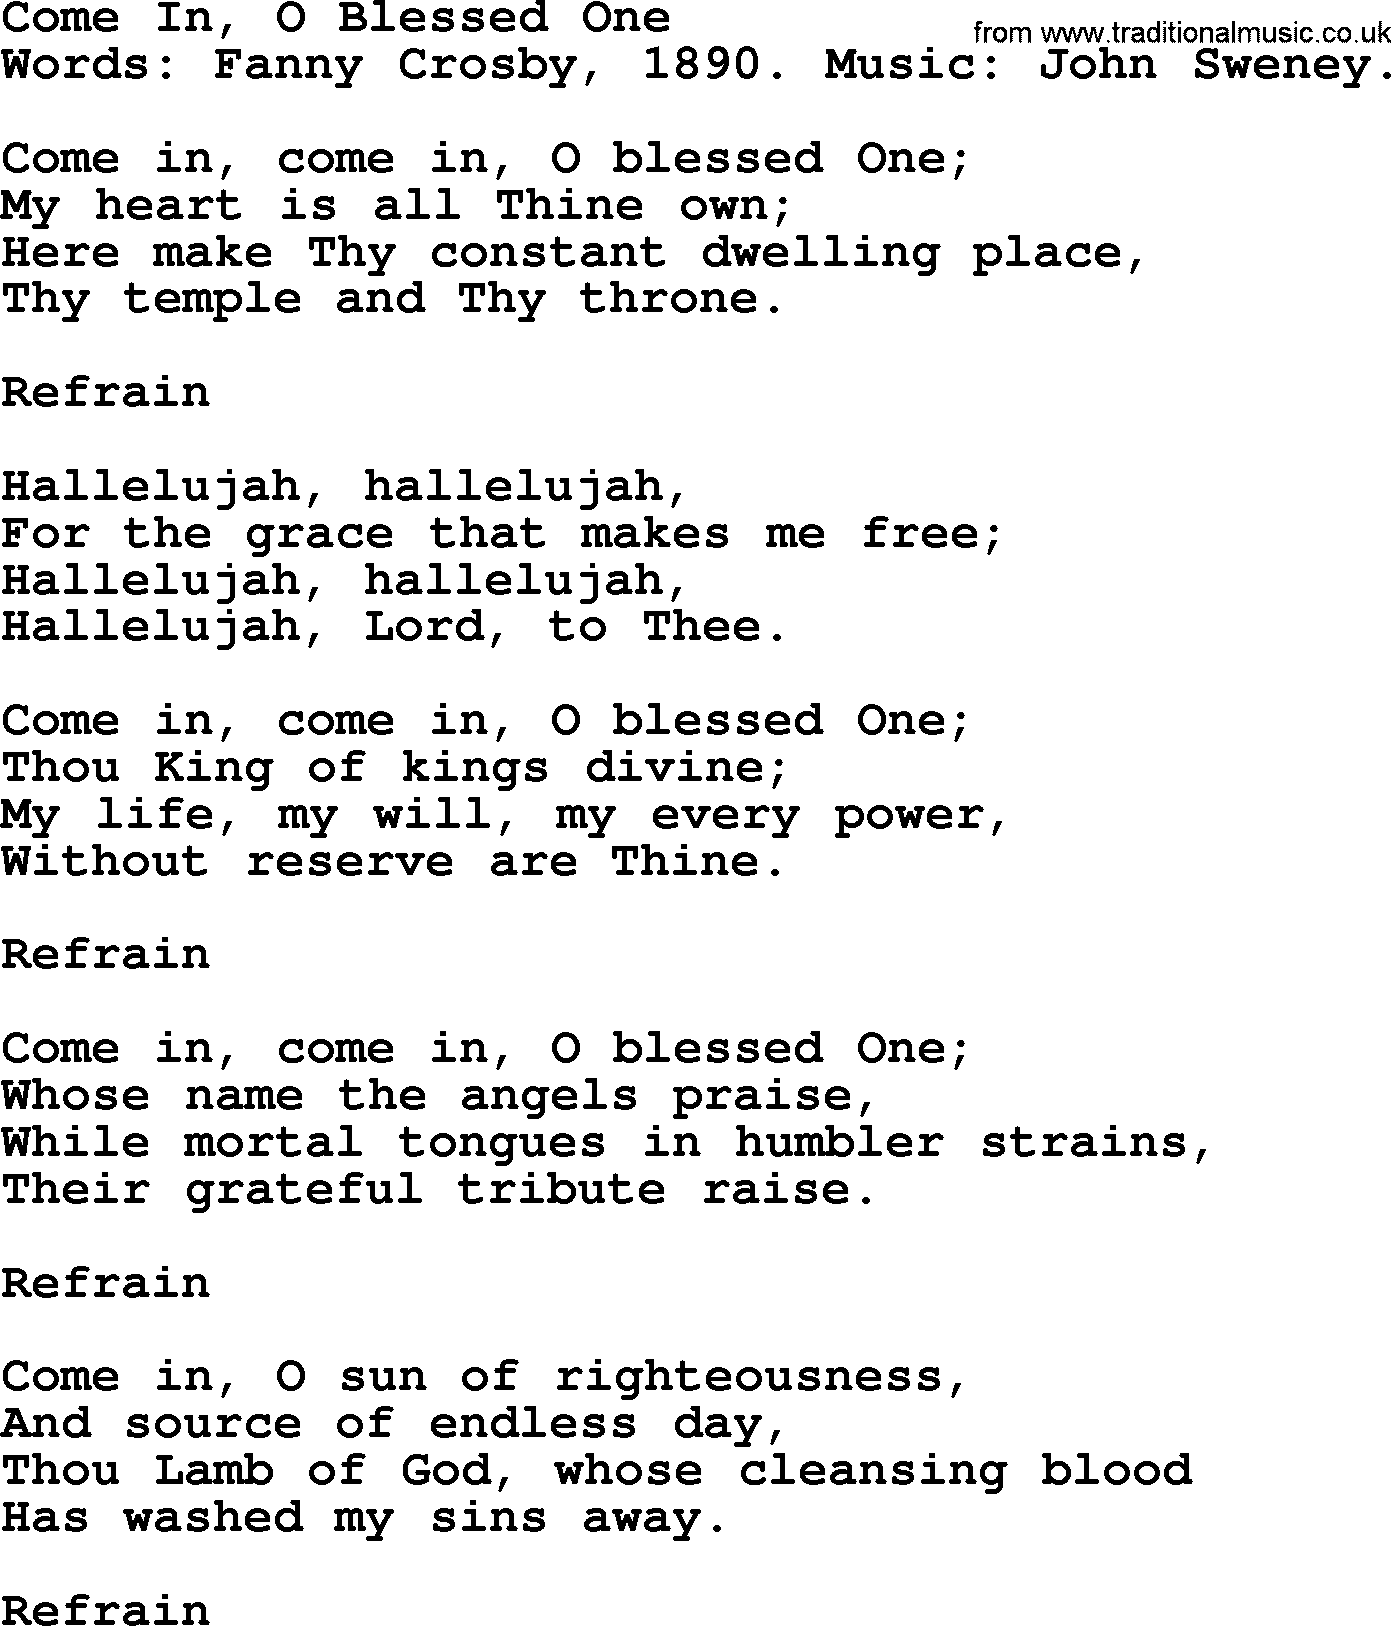 Fanny Crosby song: Come In, O Blessed One, lyrics